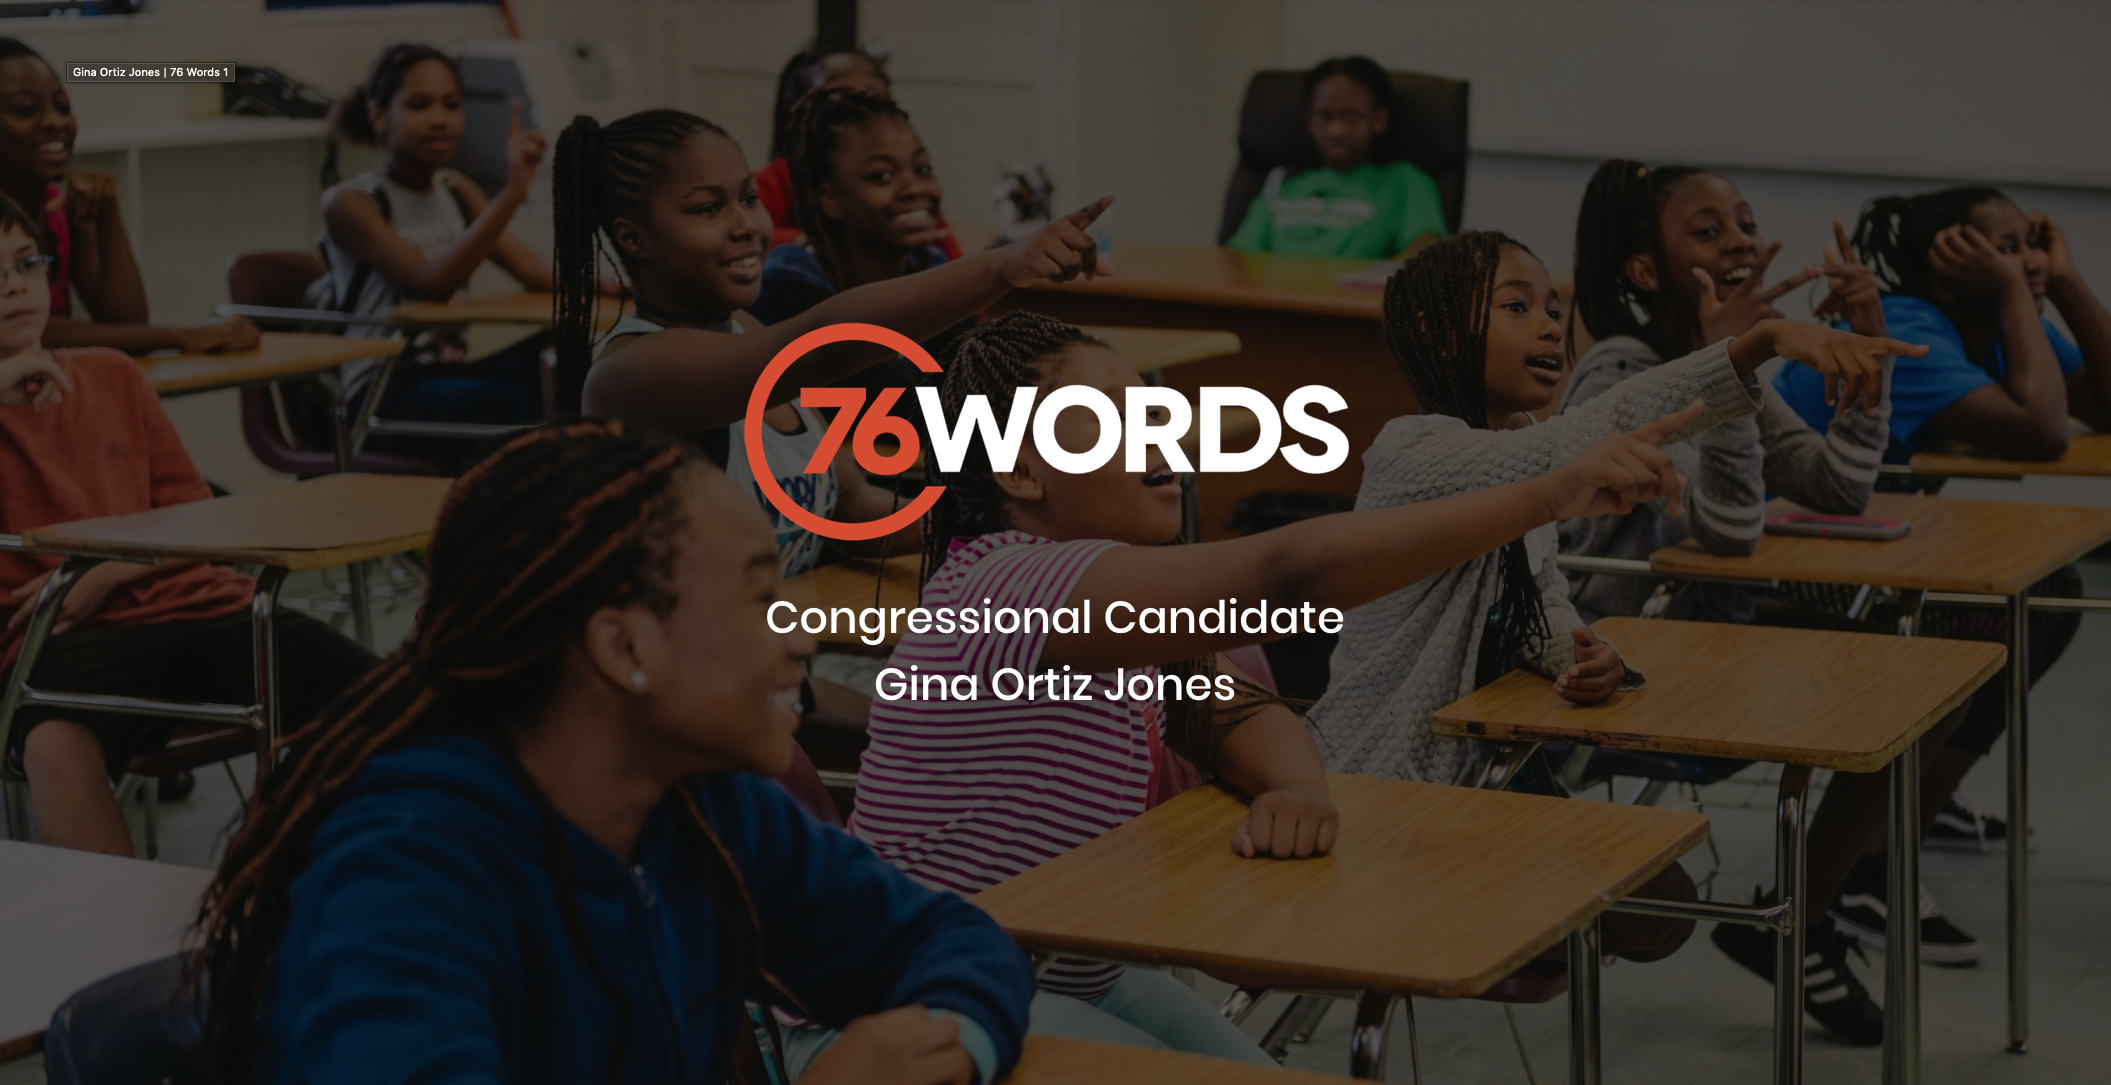 IU C&I Studios Page White and orange 76 Words Congressional Candidate Gina Ortiz Jones logo with a dimmed background showing a group of young students in a classroom